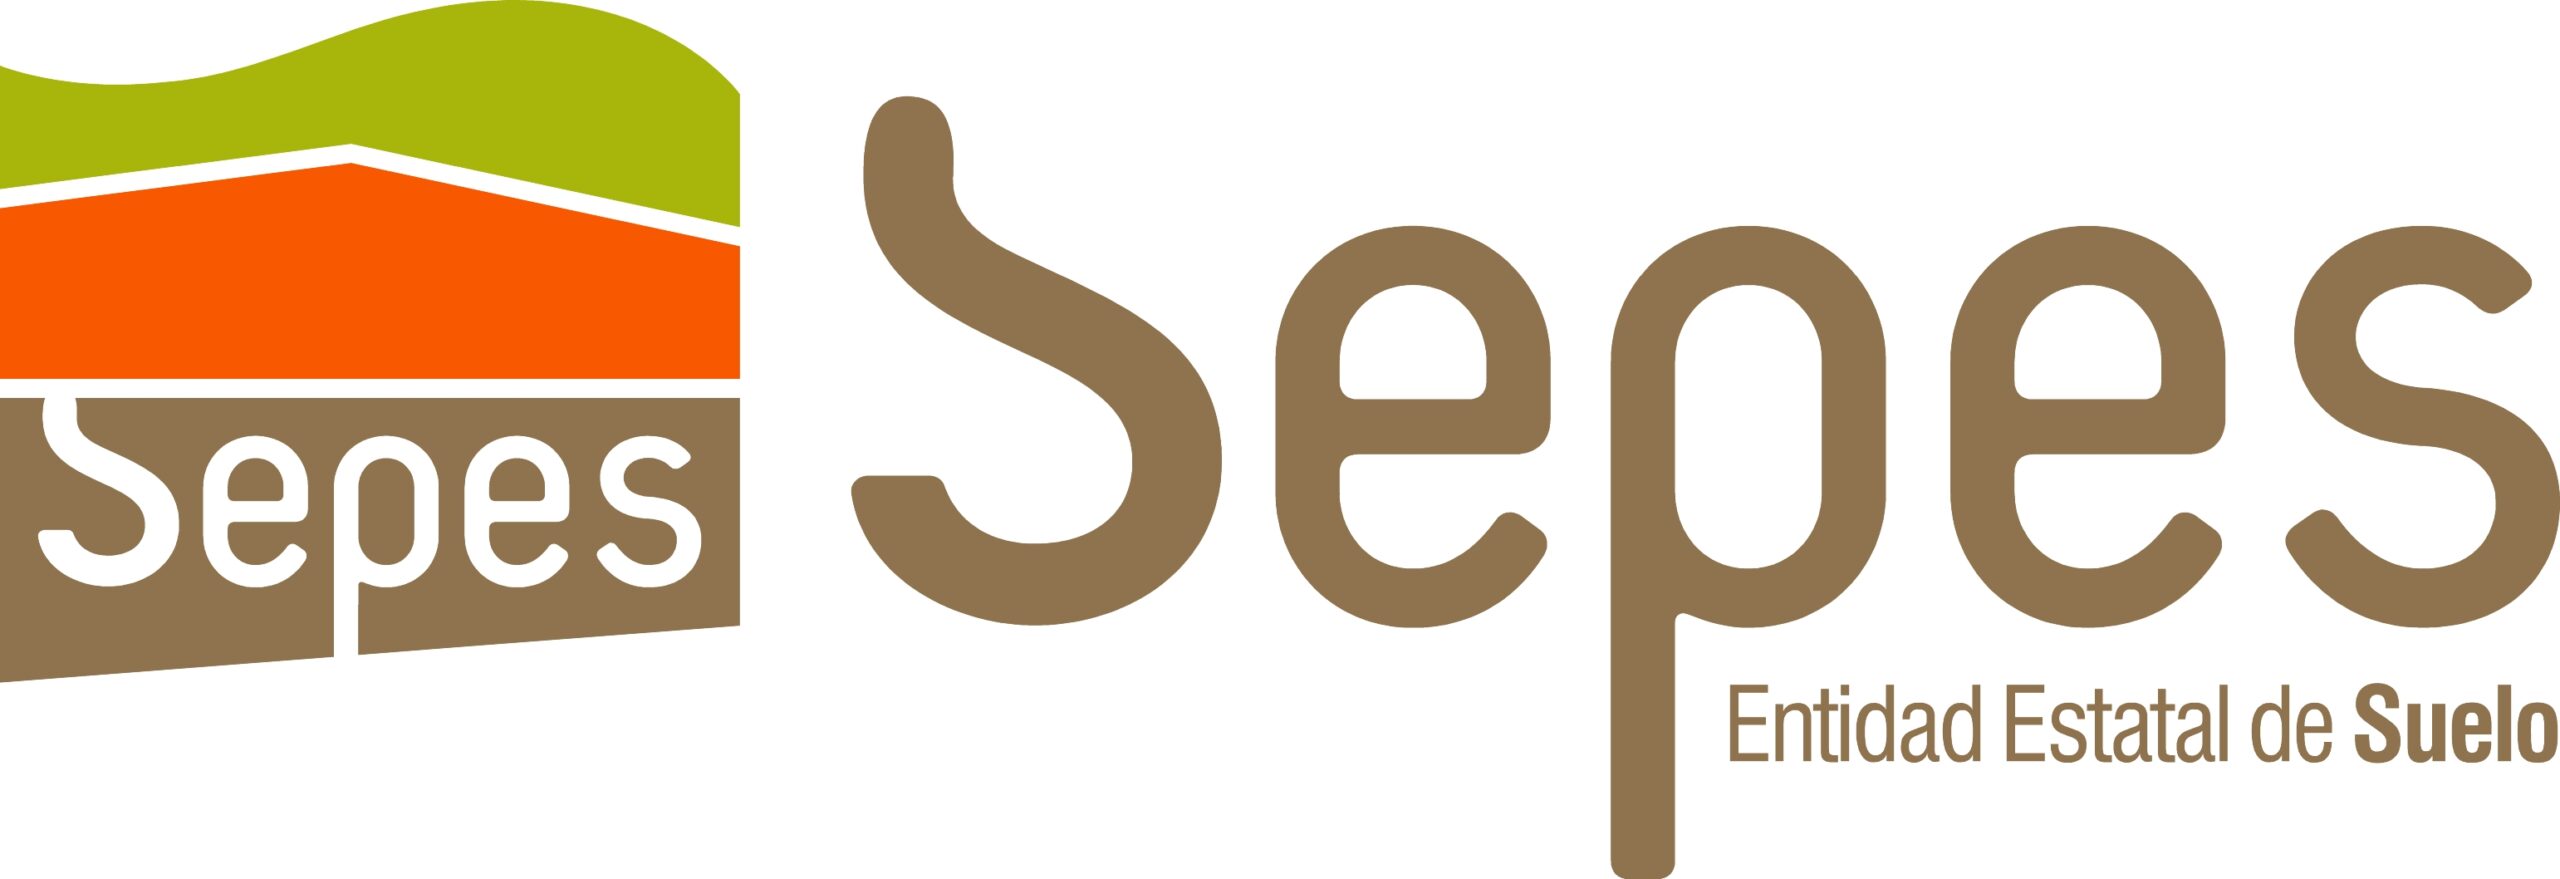 8-sepes